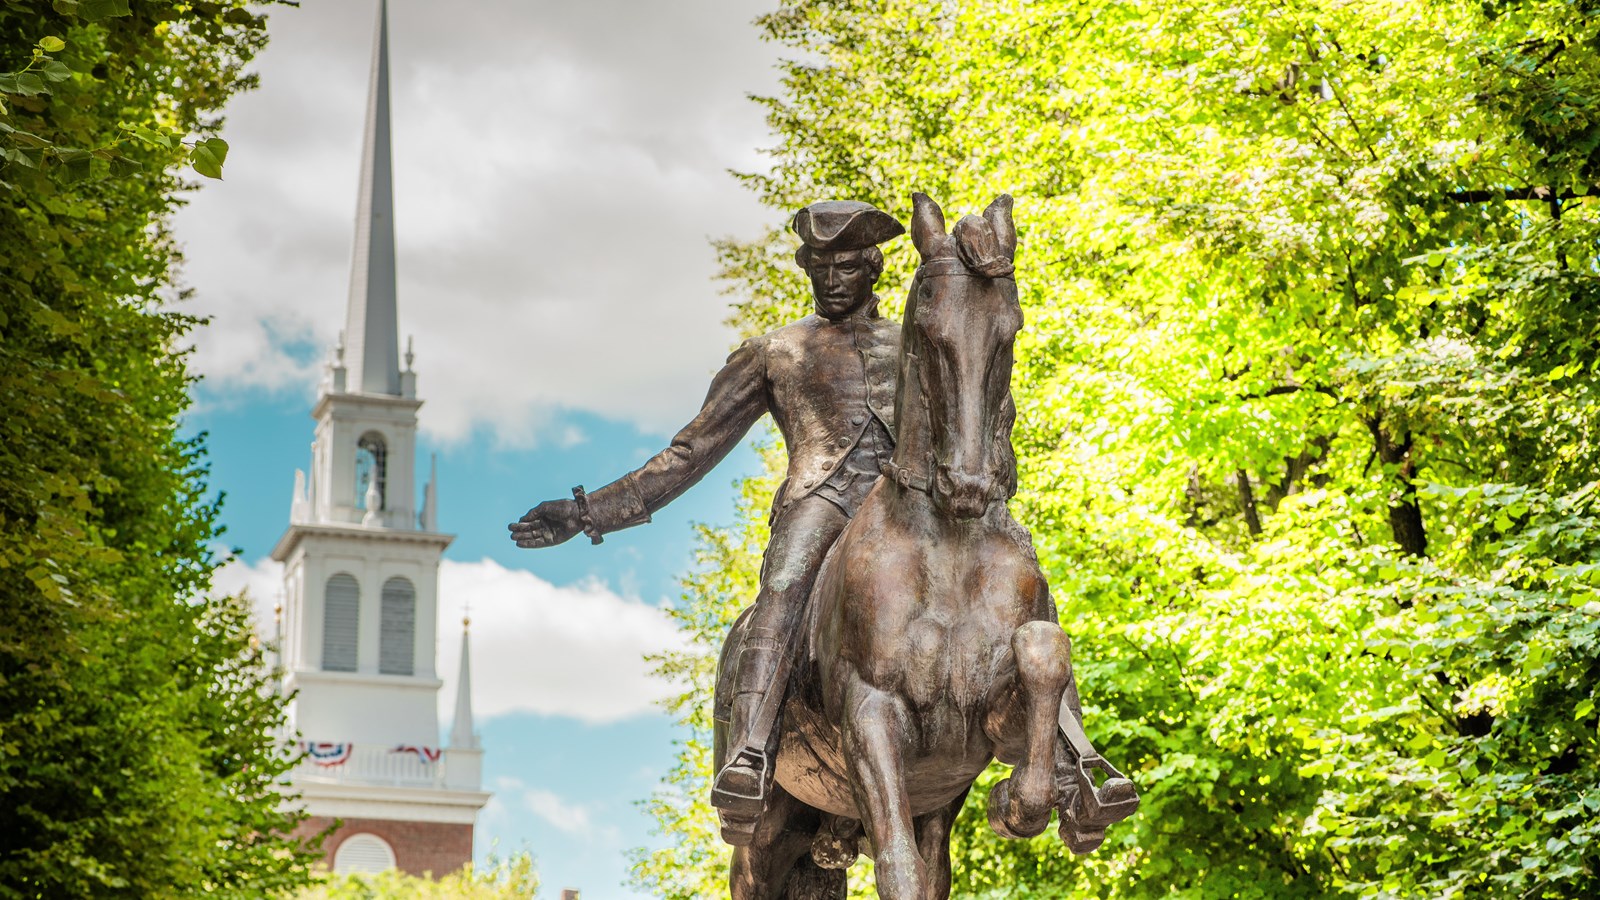 A bronze statue of Paul Revere riding a horse in front of the white steeple of Old North Church